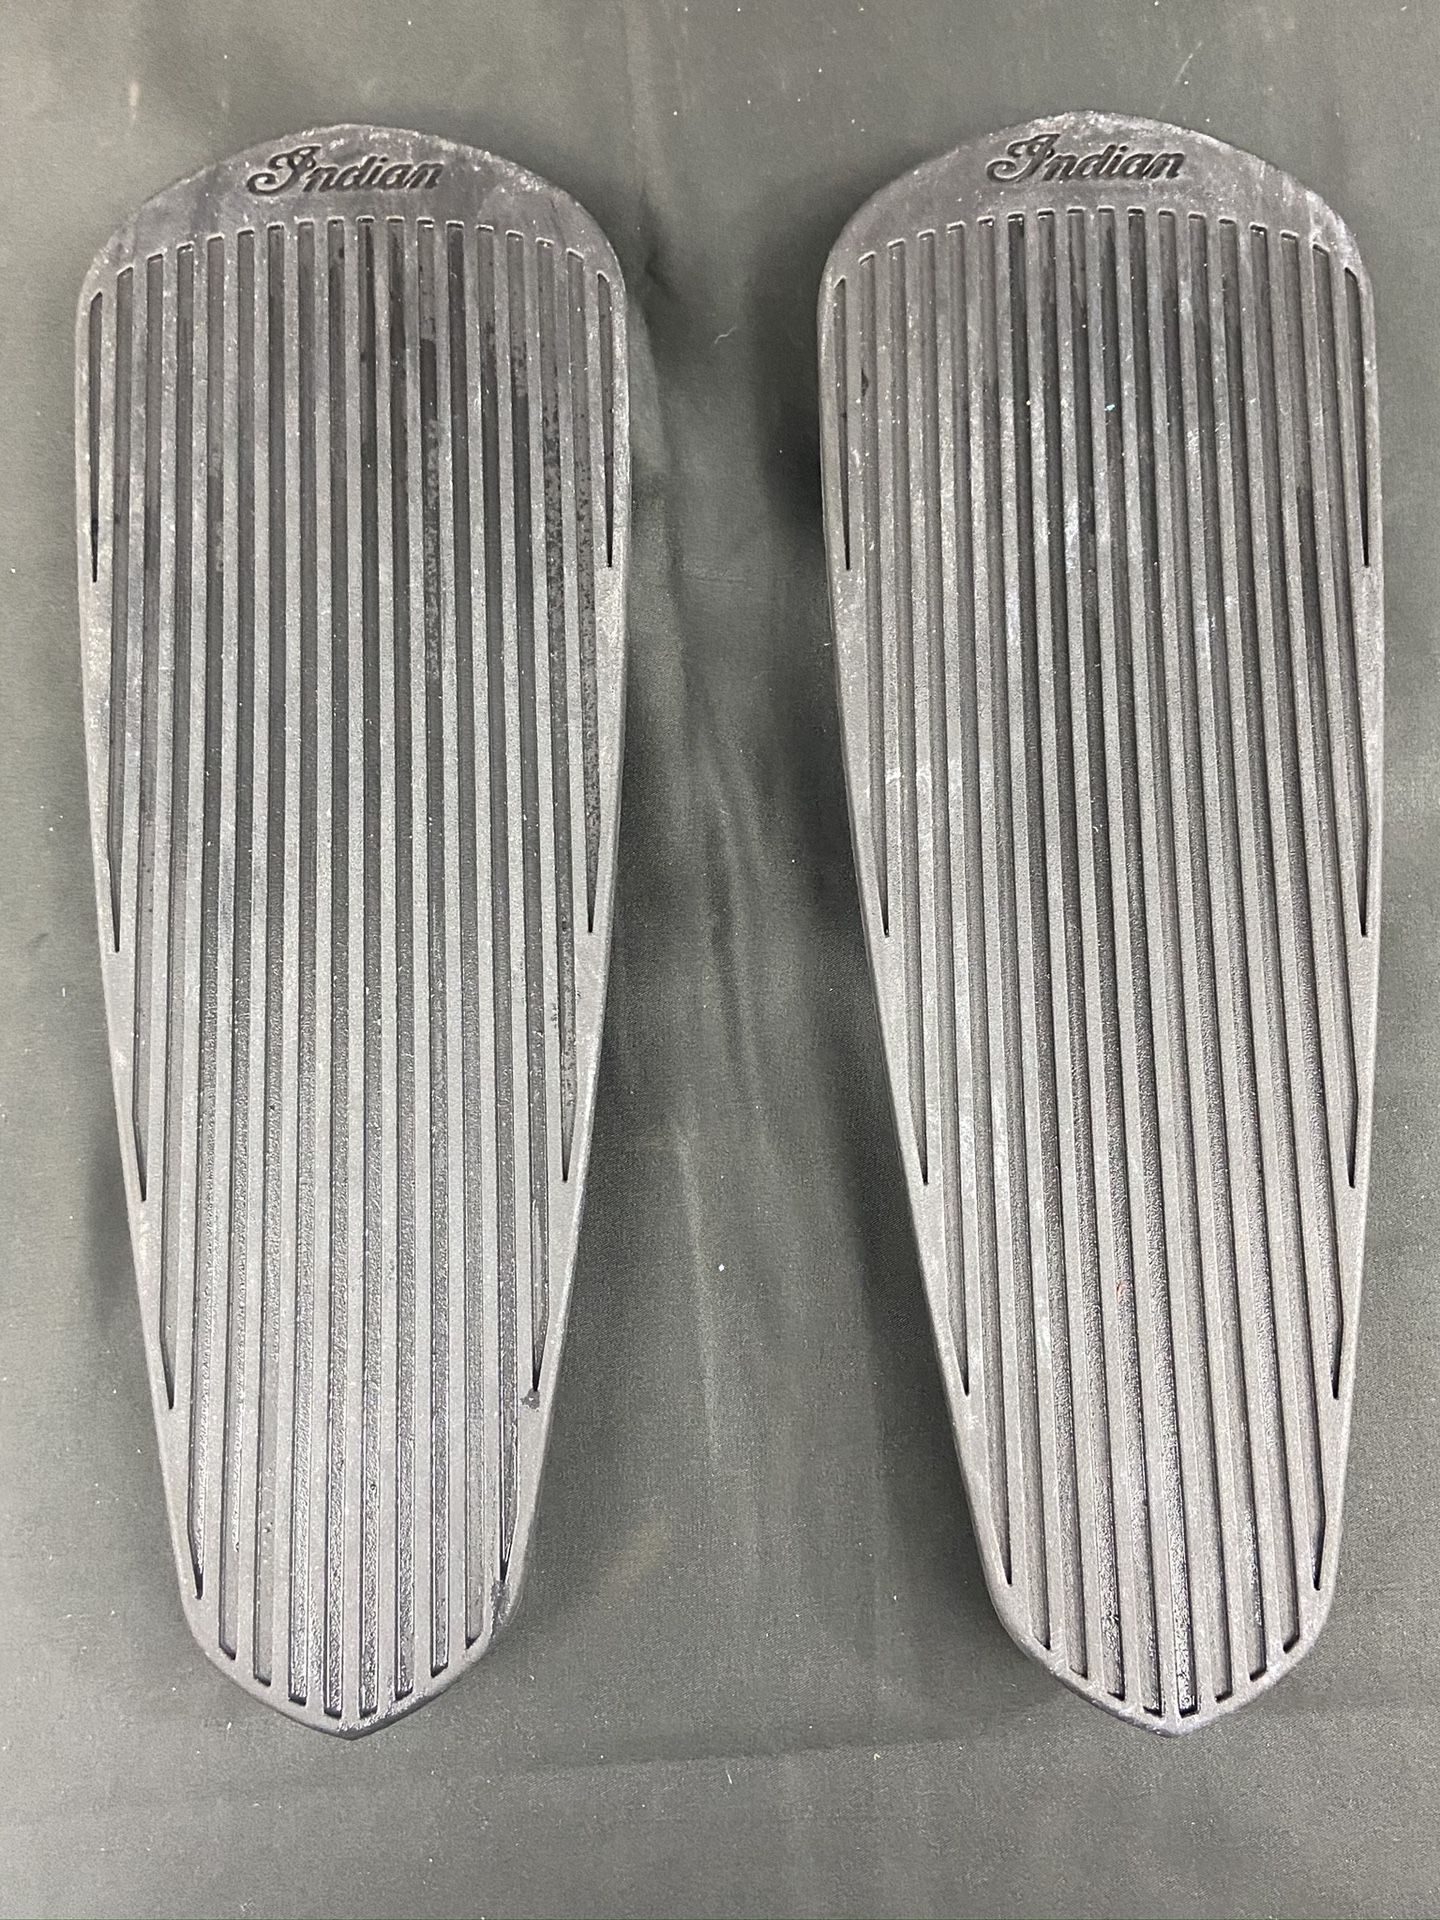 Indian motorcycle rubber foot pads